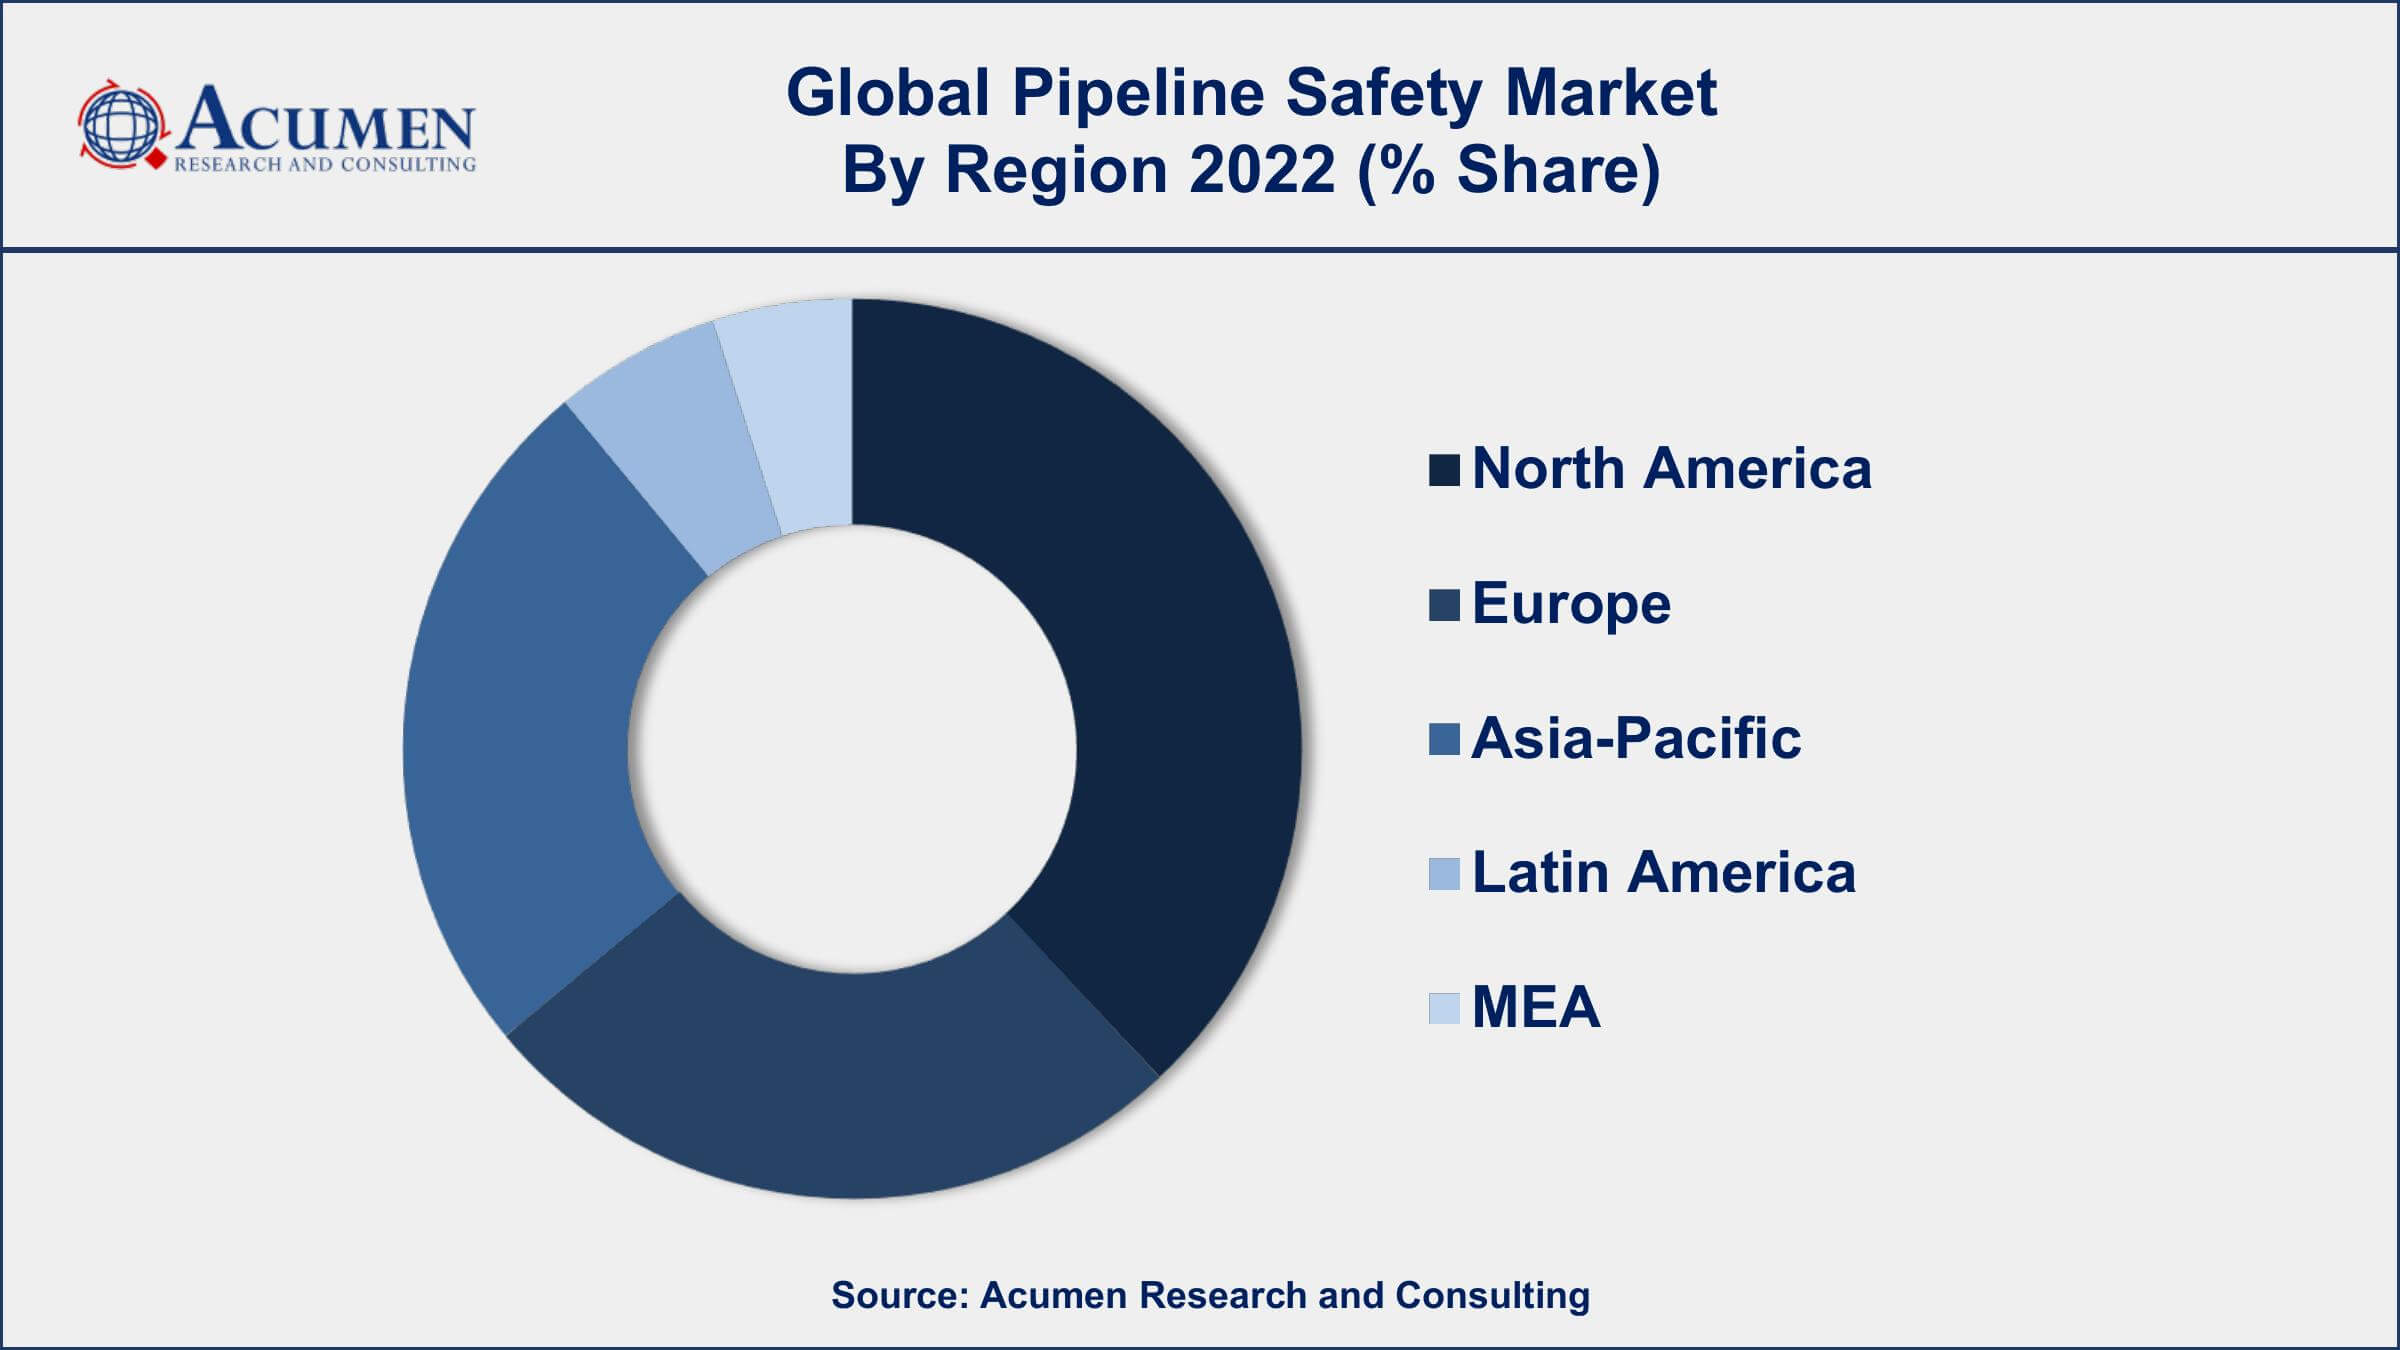 Pipeline Safety Market Drivers